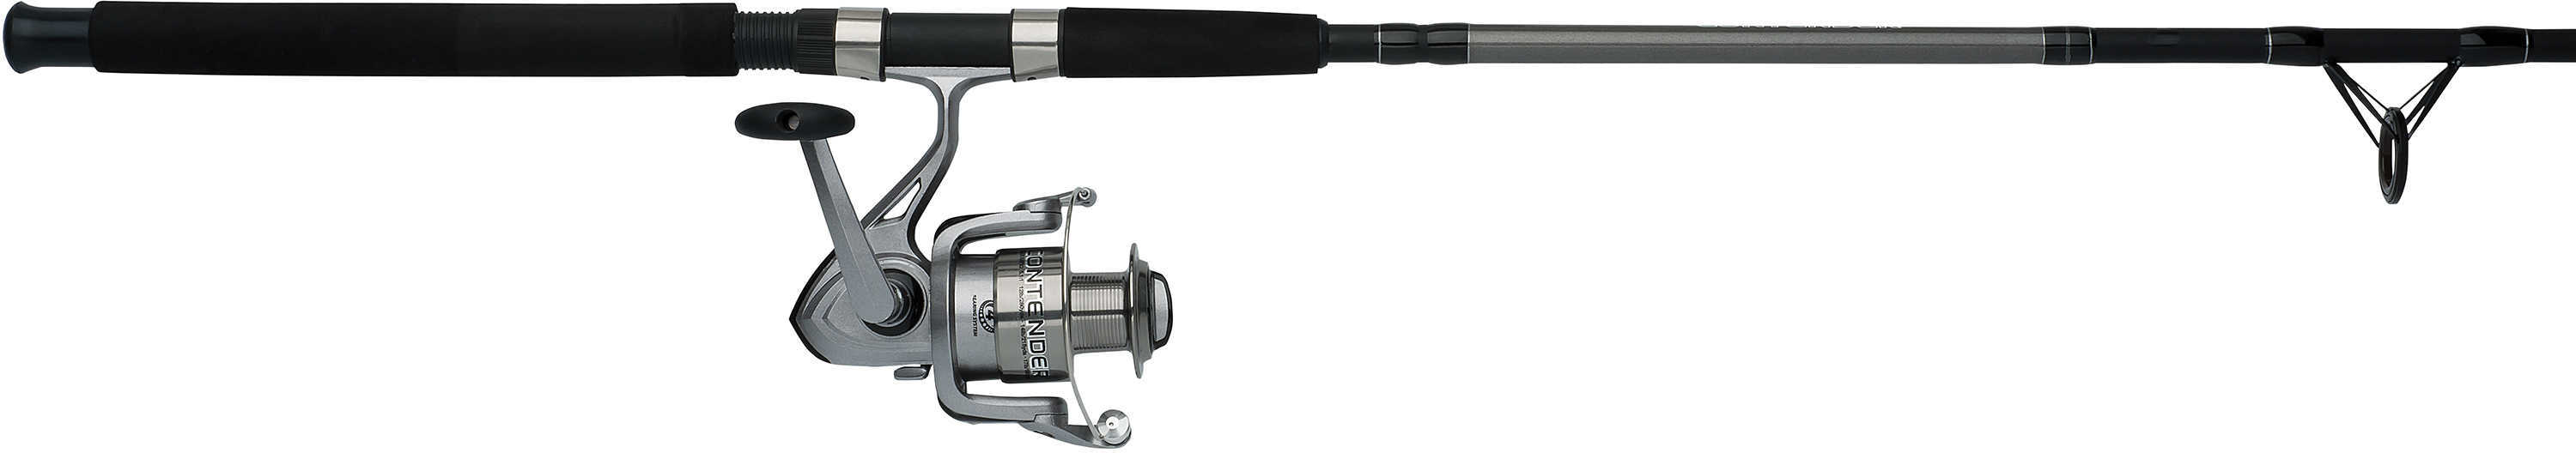 Shakespeare Contbw29070cbo Contender Spinning Combo 70 9' 2pc Med/Hvy Power Ambicontender